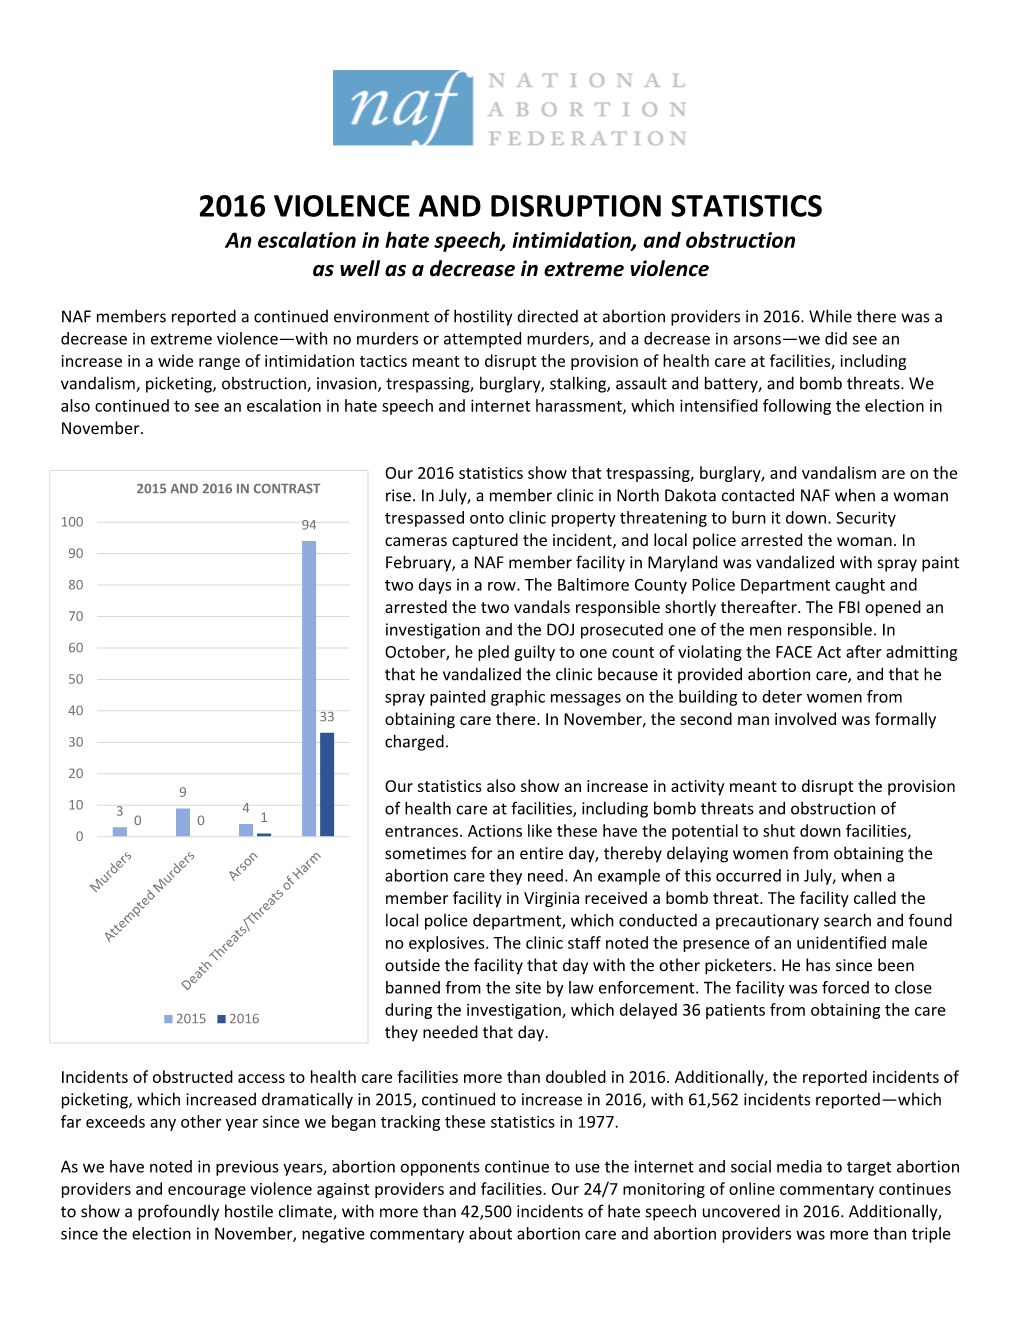 2016 VIOLENCE and DISRUPTION STATISTICS an Escalation in Hate Speech, Intimidation, and Obstruction As Well As a Decrease in Extreme Violence